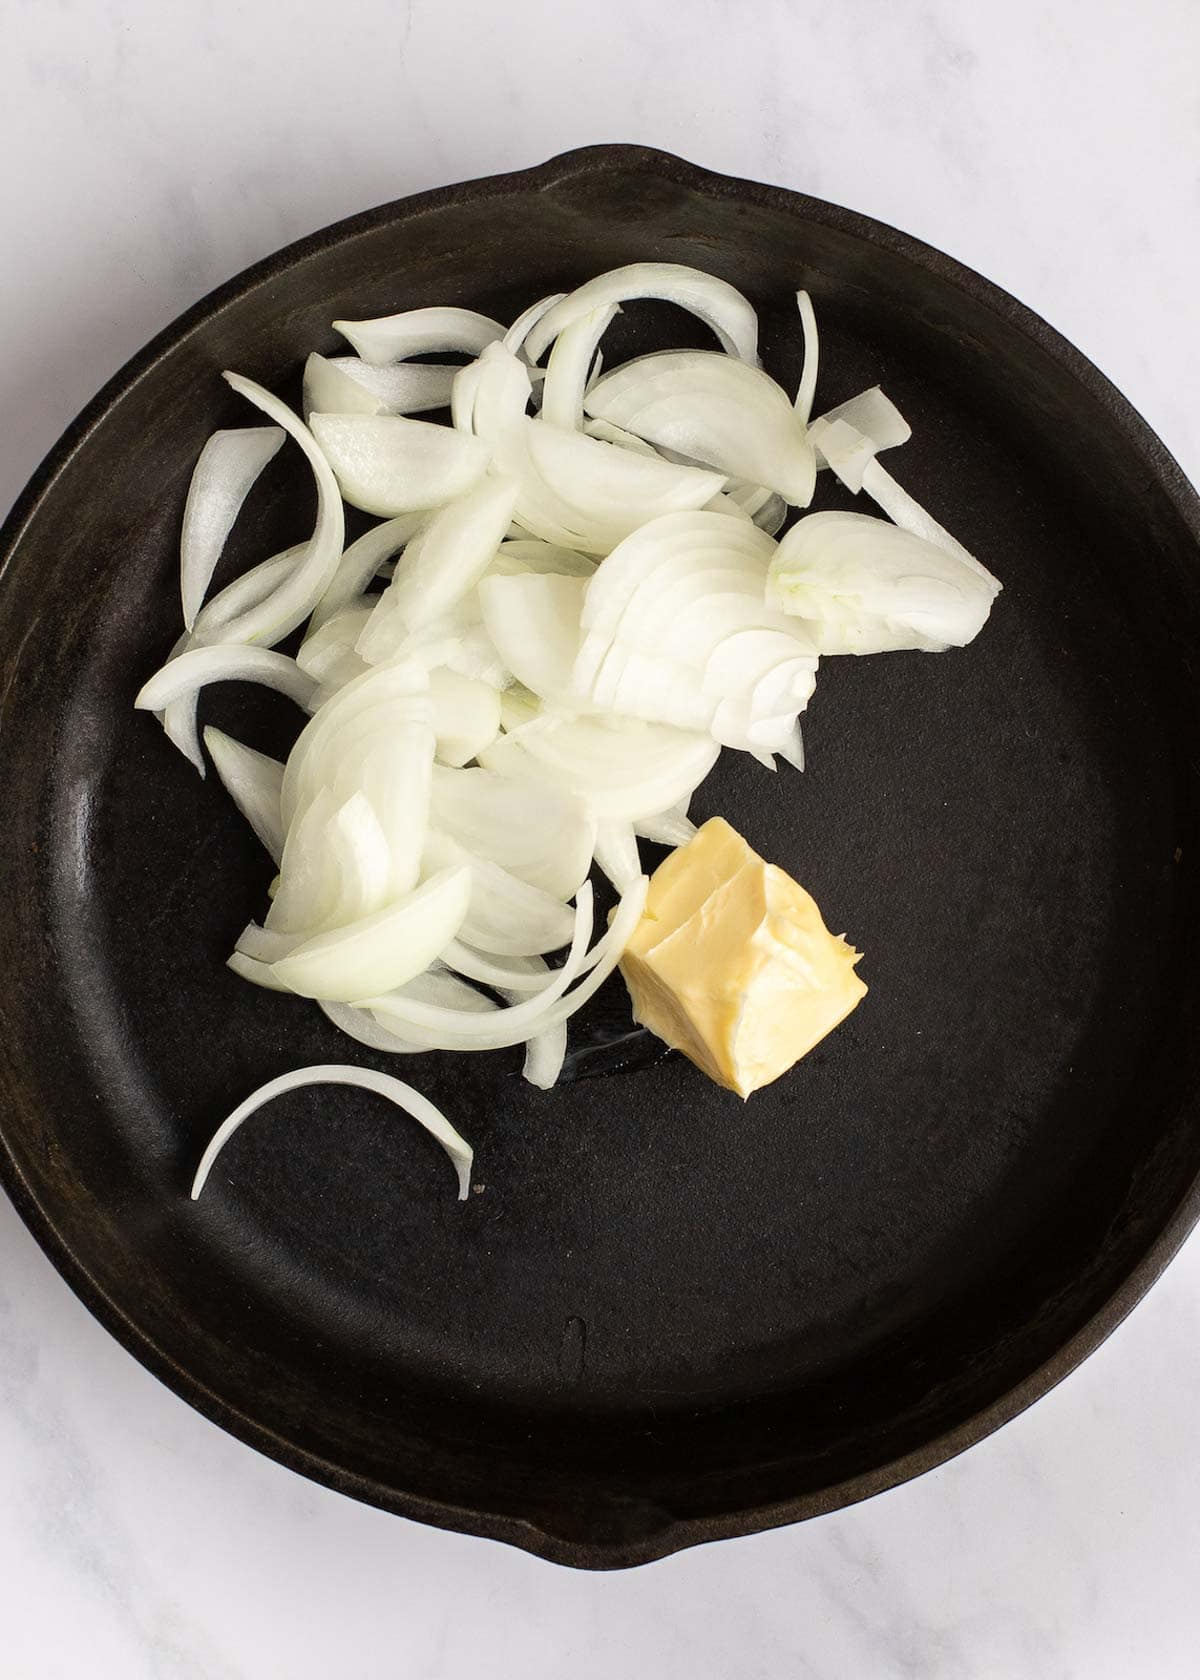 butter and onions in skillet